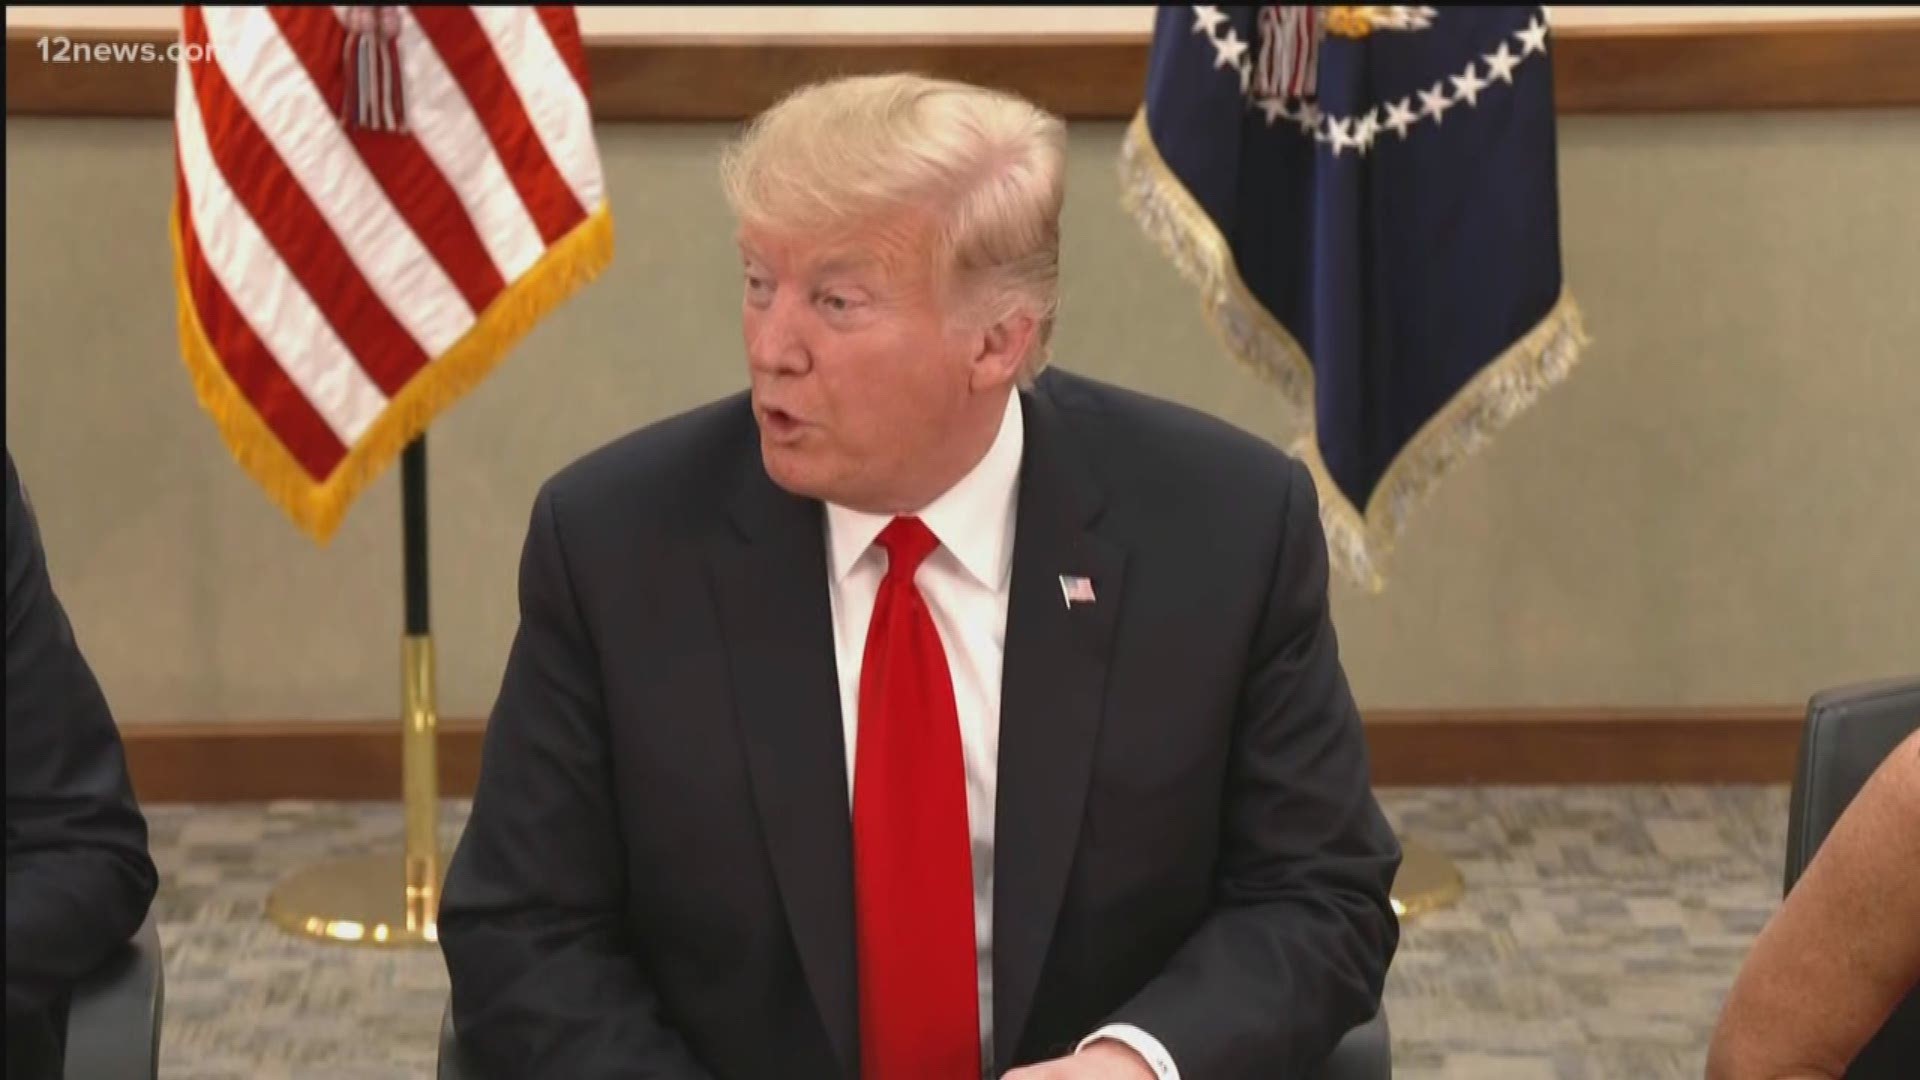 An exclusive panel of citizens sat down with 12 News to discuss President Trump's address to the nation this evening. They reacted to his statements about border security and the rebuttal given by Democratic leaders.